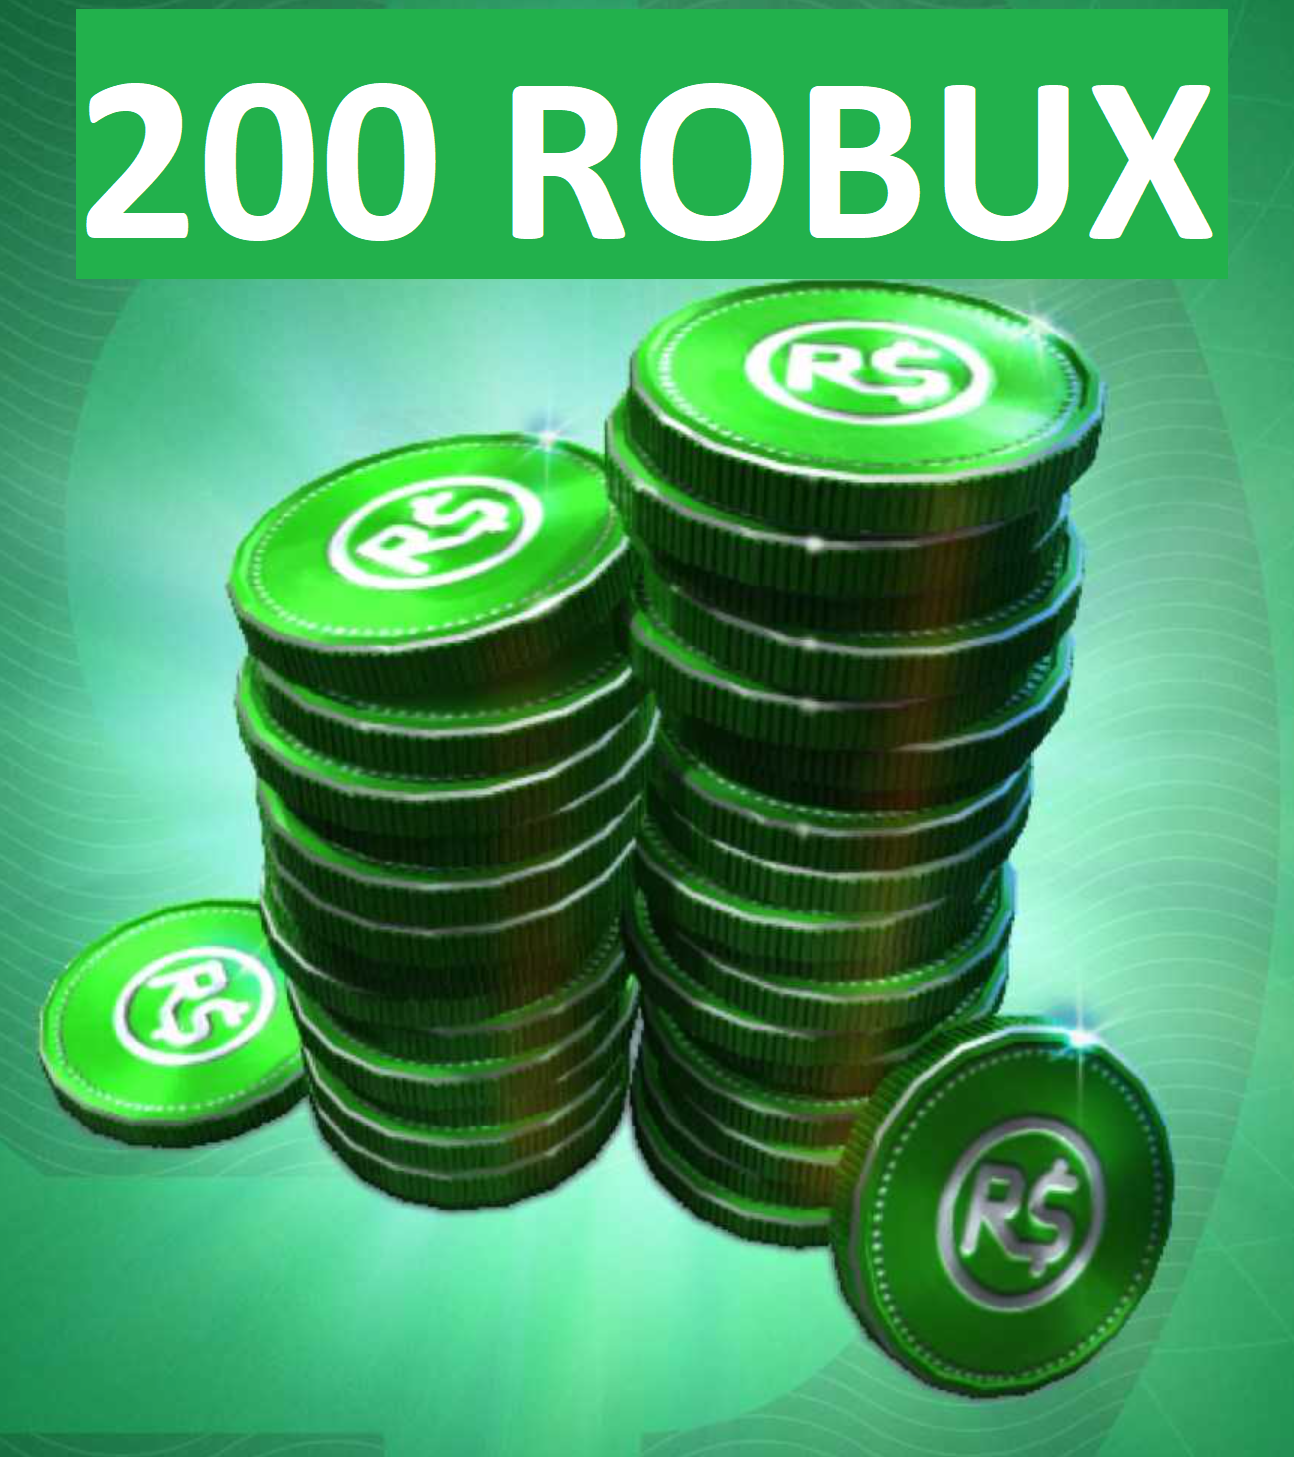 Buy Roblox Gift Card 200 Robux Global And Download - robux card back